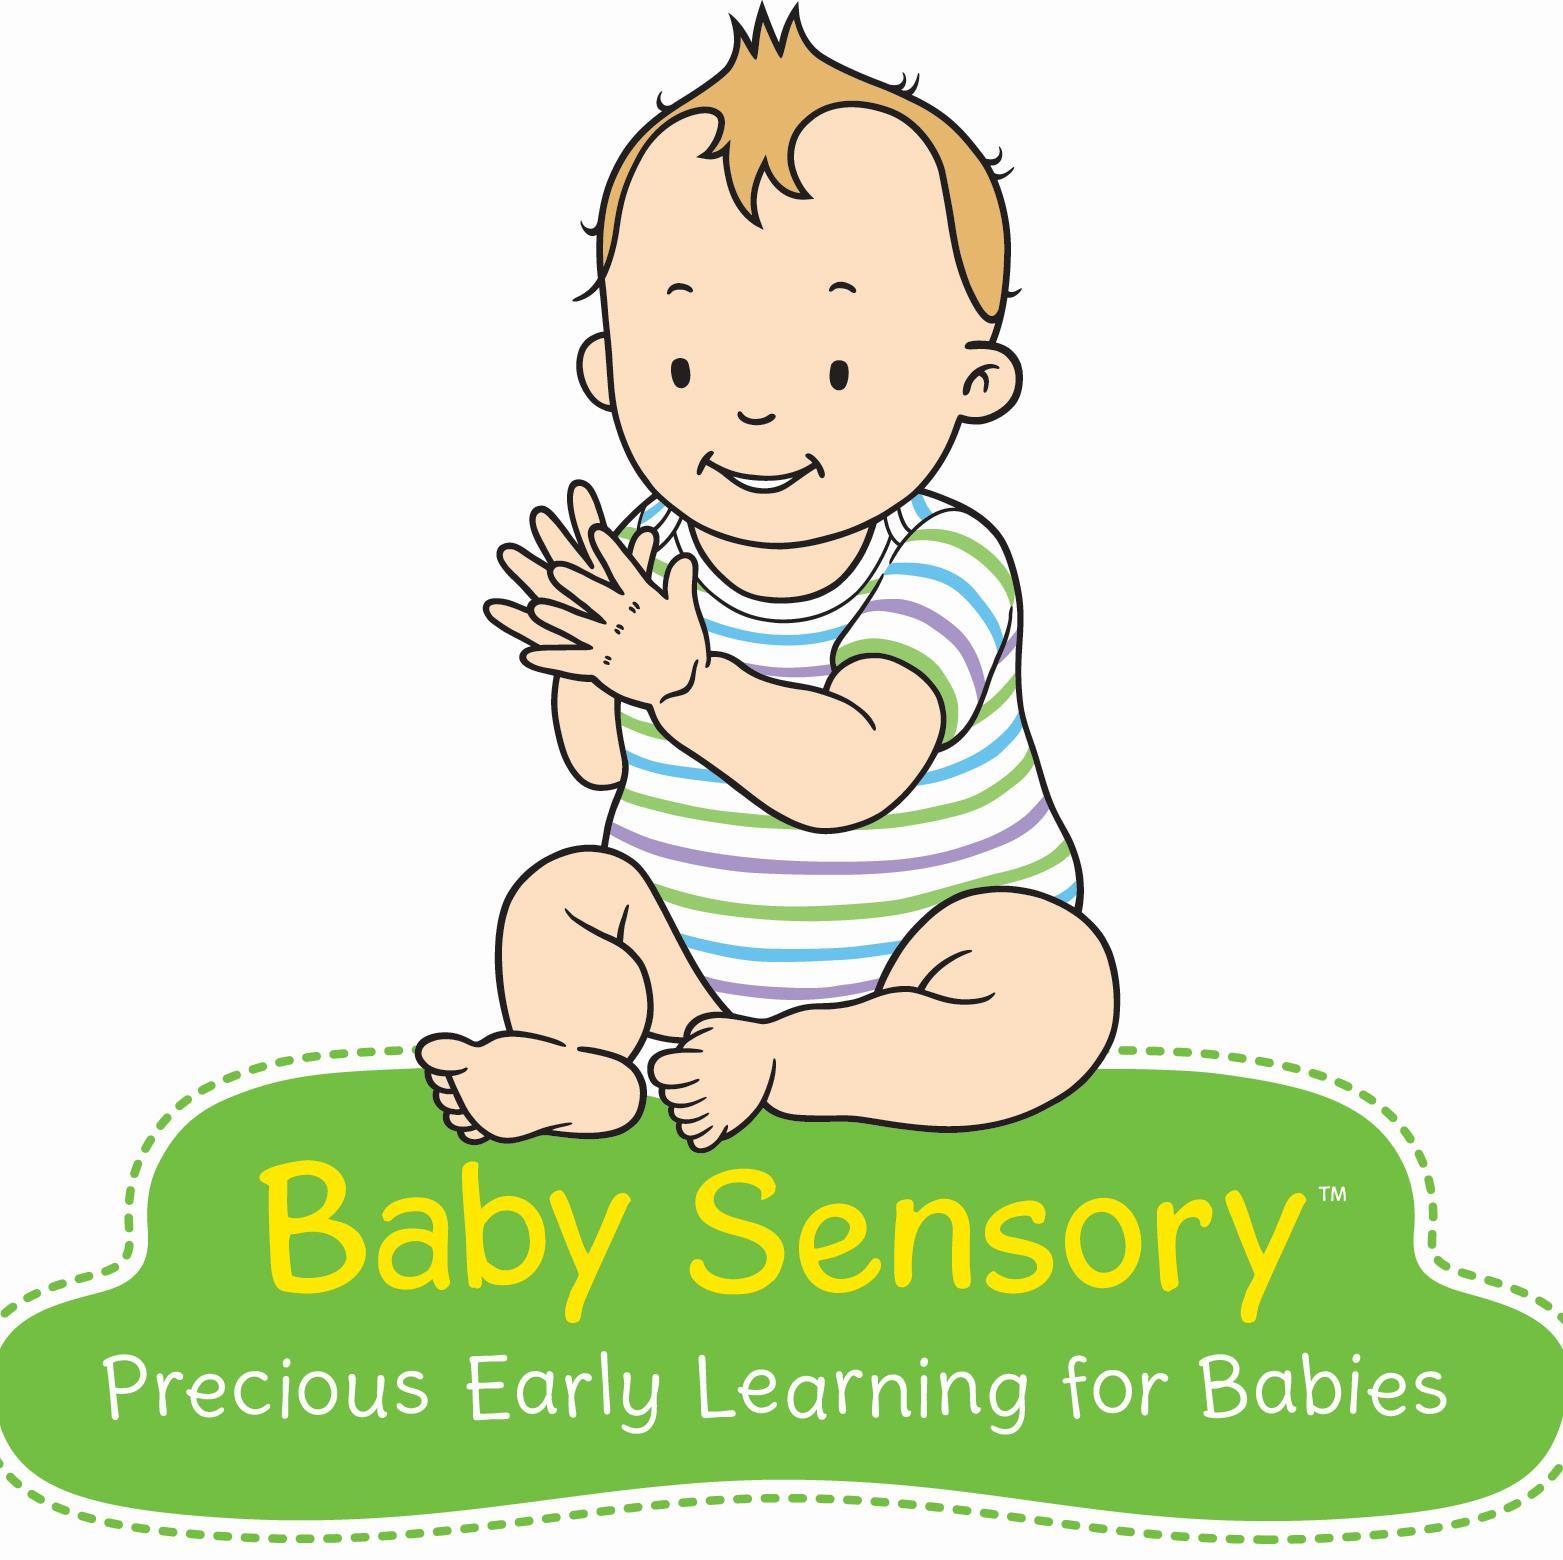 Baby Sensory classes running in Wimborne, Broadstone and Poole